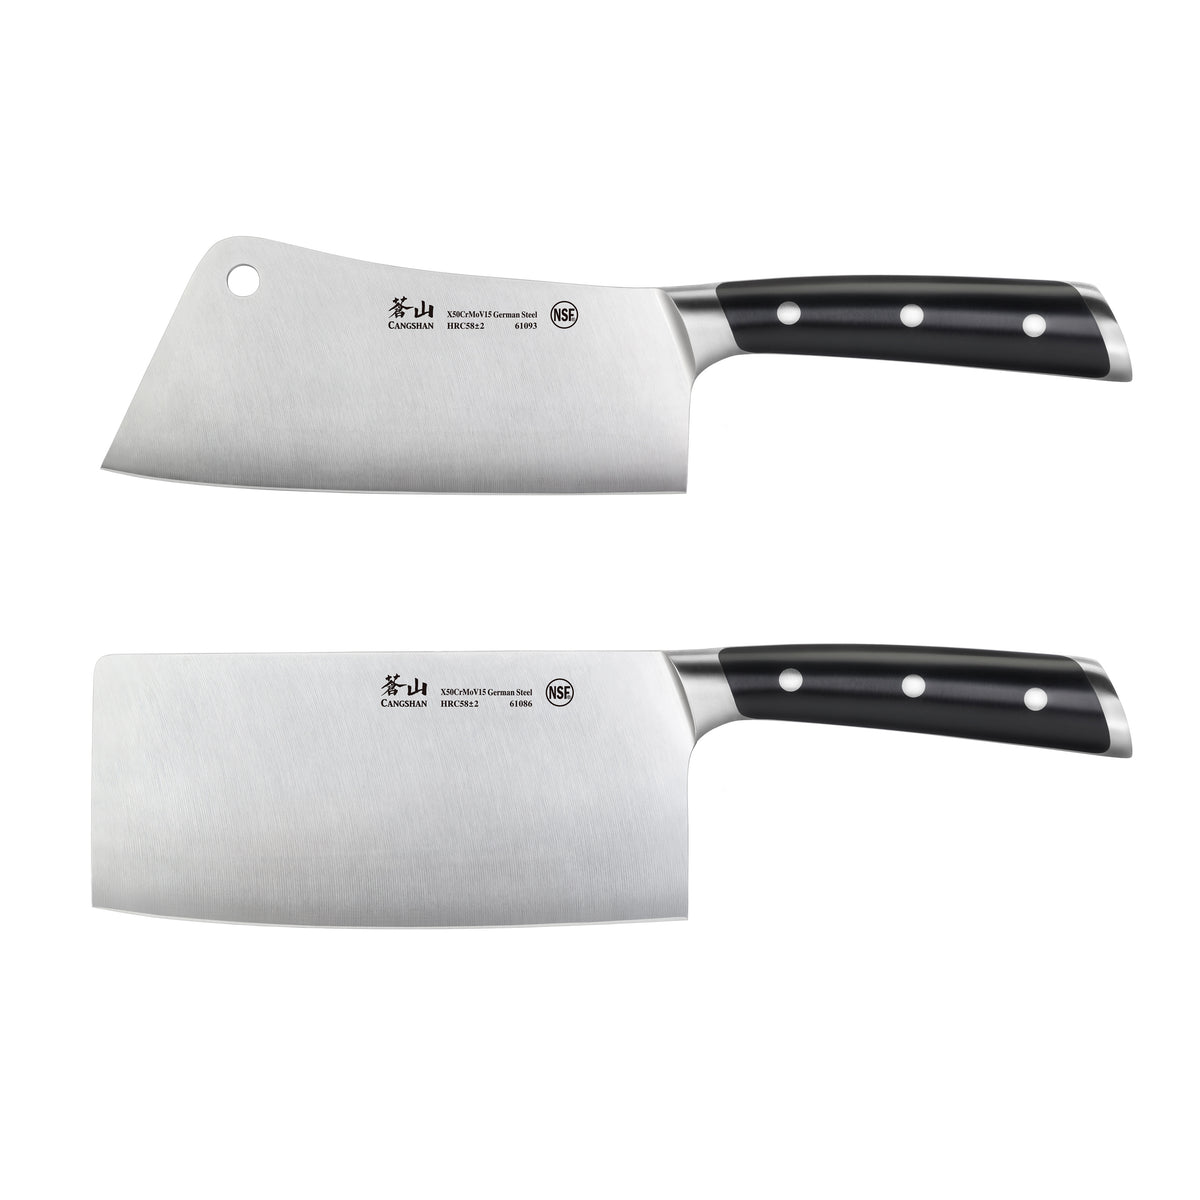 Cangshan L Series German Steel Forged 2-piece Cleaver Knife Set – RJP  Unlimited